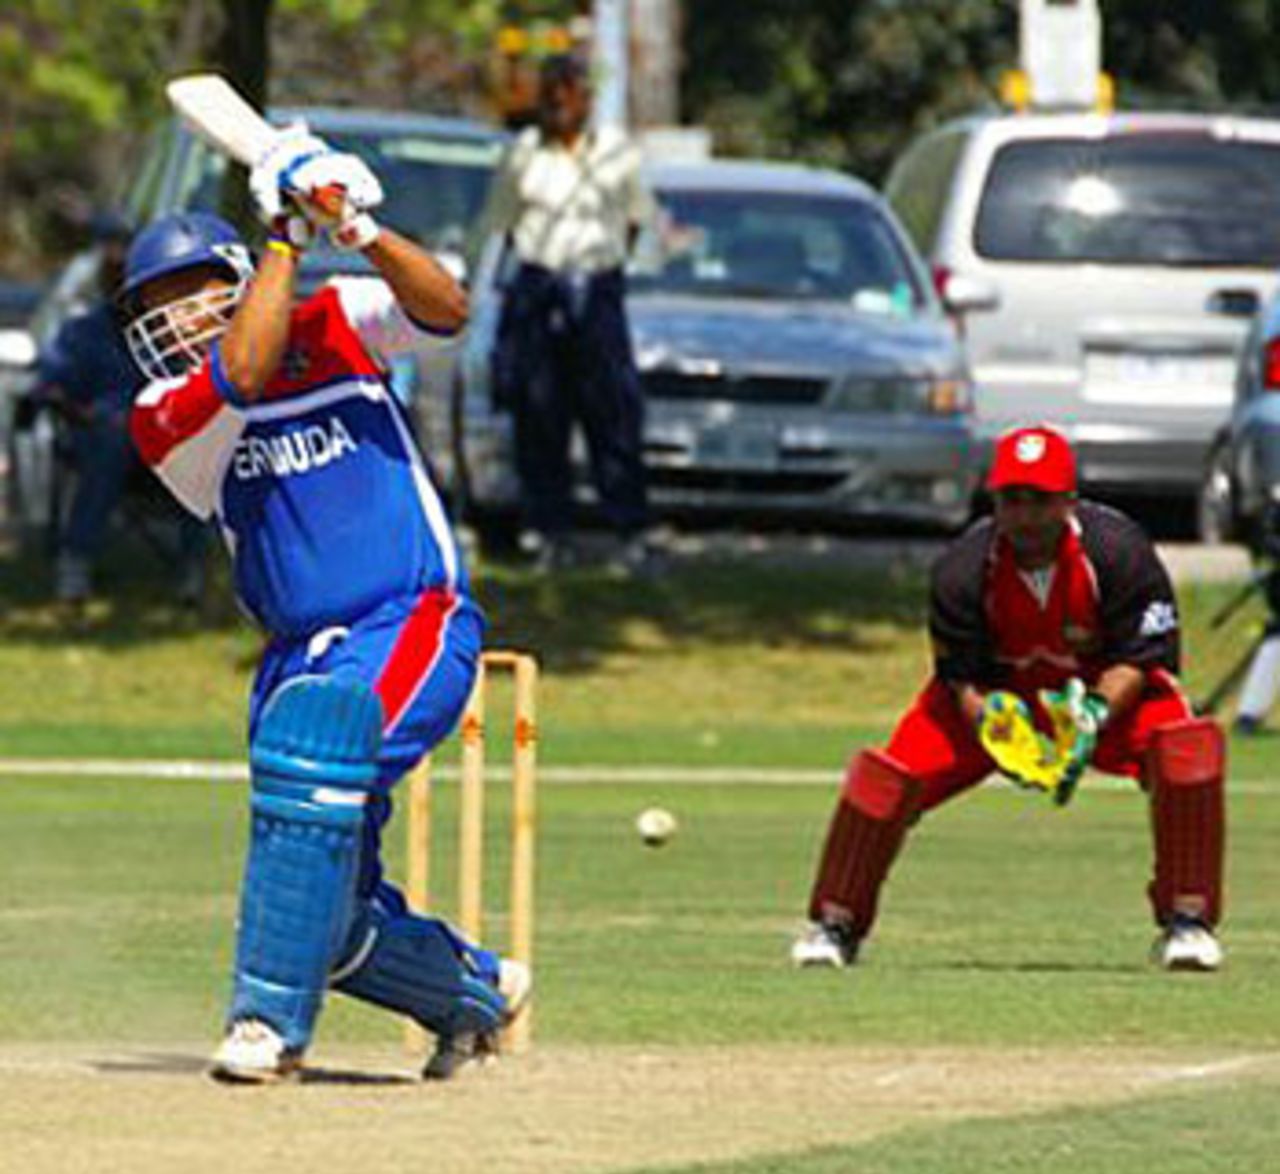 Irvine Romaine hits out on his way to 101, Canada v Bermuda, Toronto, August 21, 2006